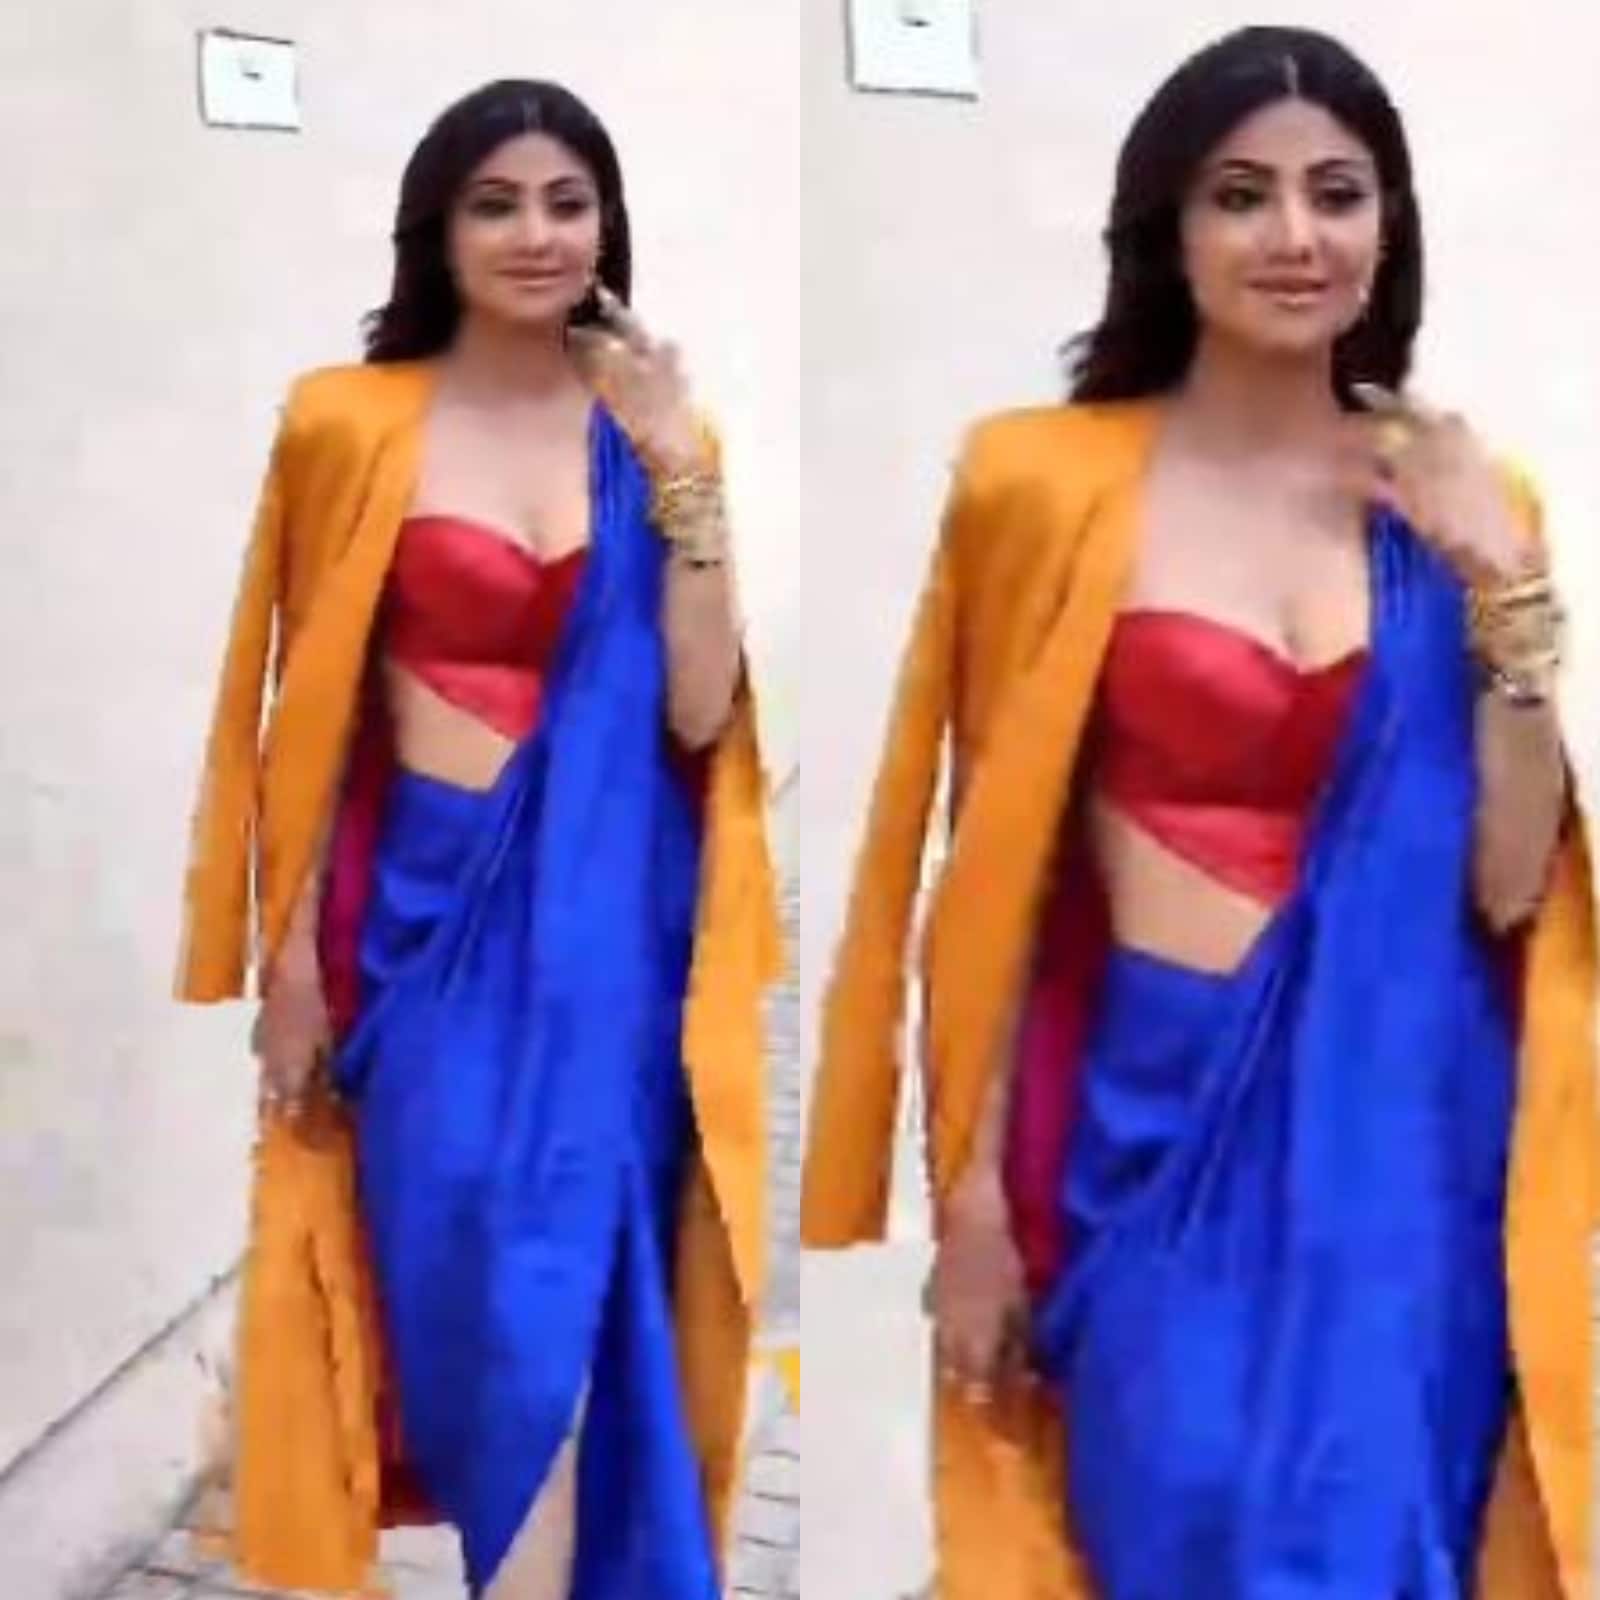 Silpa Setty Sexy Xnxx - Shilpa Shetty Makes Appearance in Bold Outfit, Netizens Compare Her With  Urfi Javed, Poonam Pandey - News18